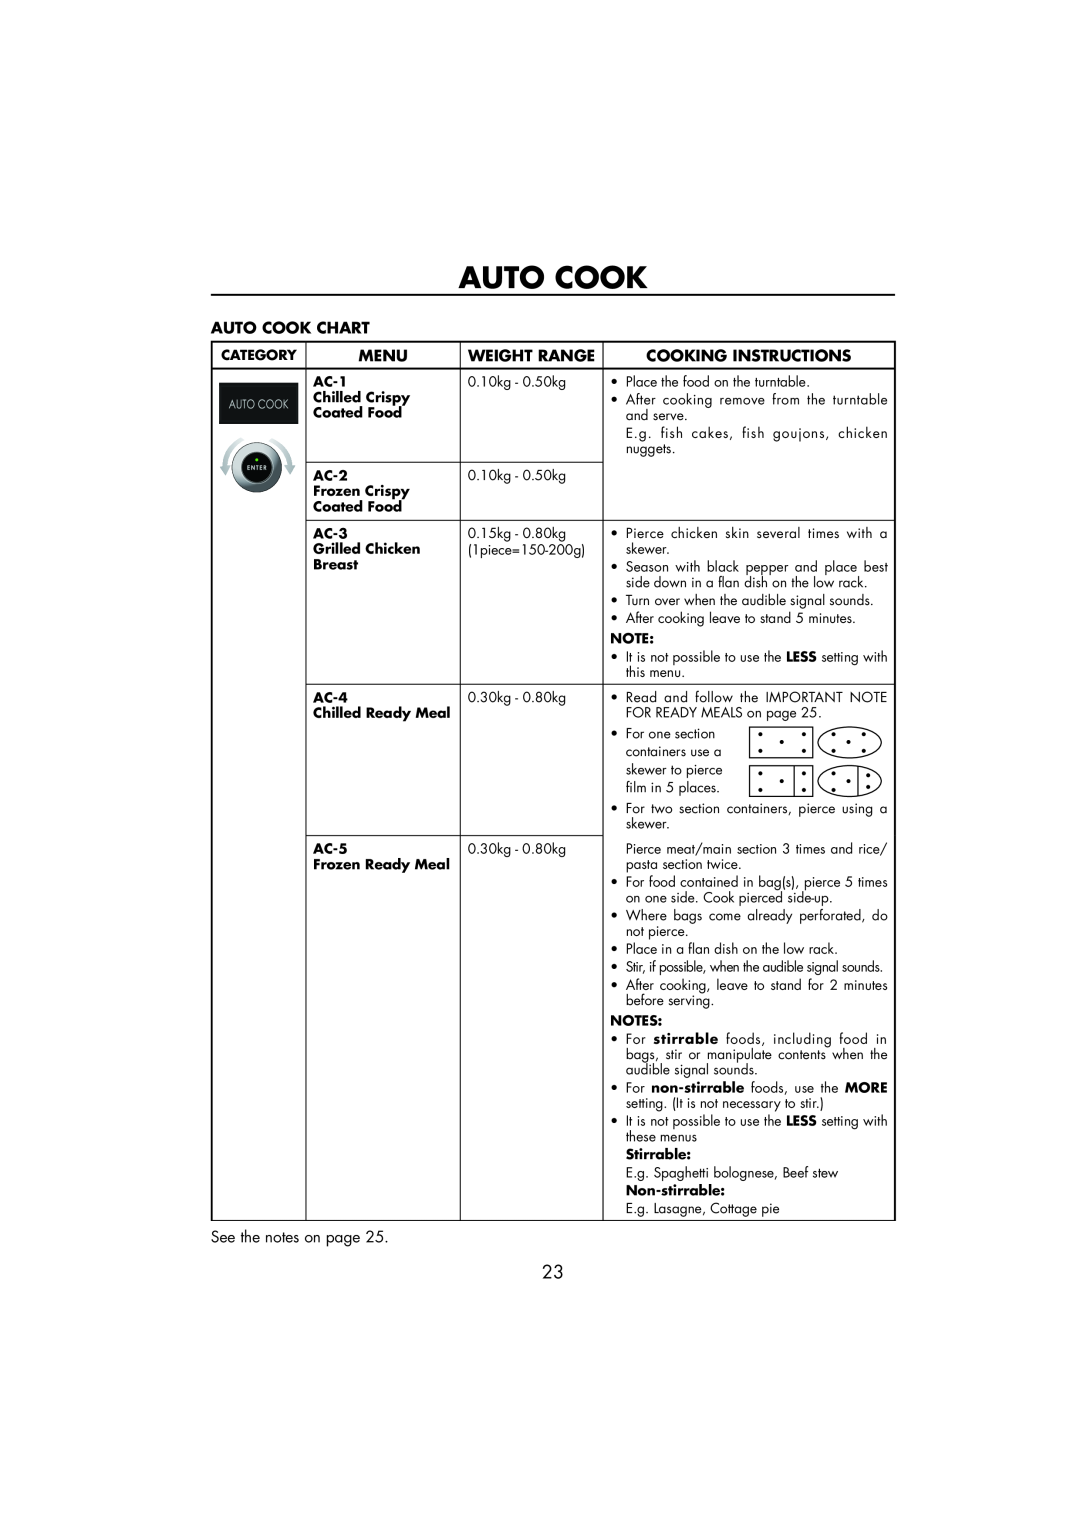 Sharp R-890SLM operation manual Auto Cook Chart, Menu, Weight Range, Cooking Instructions 